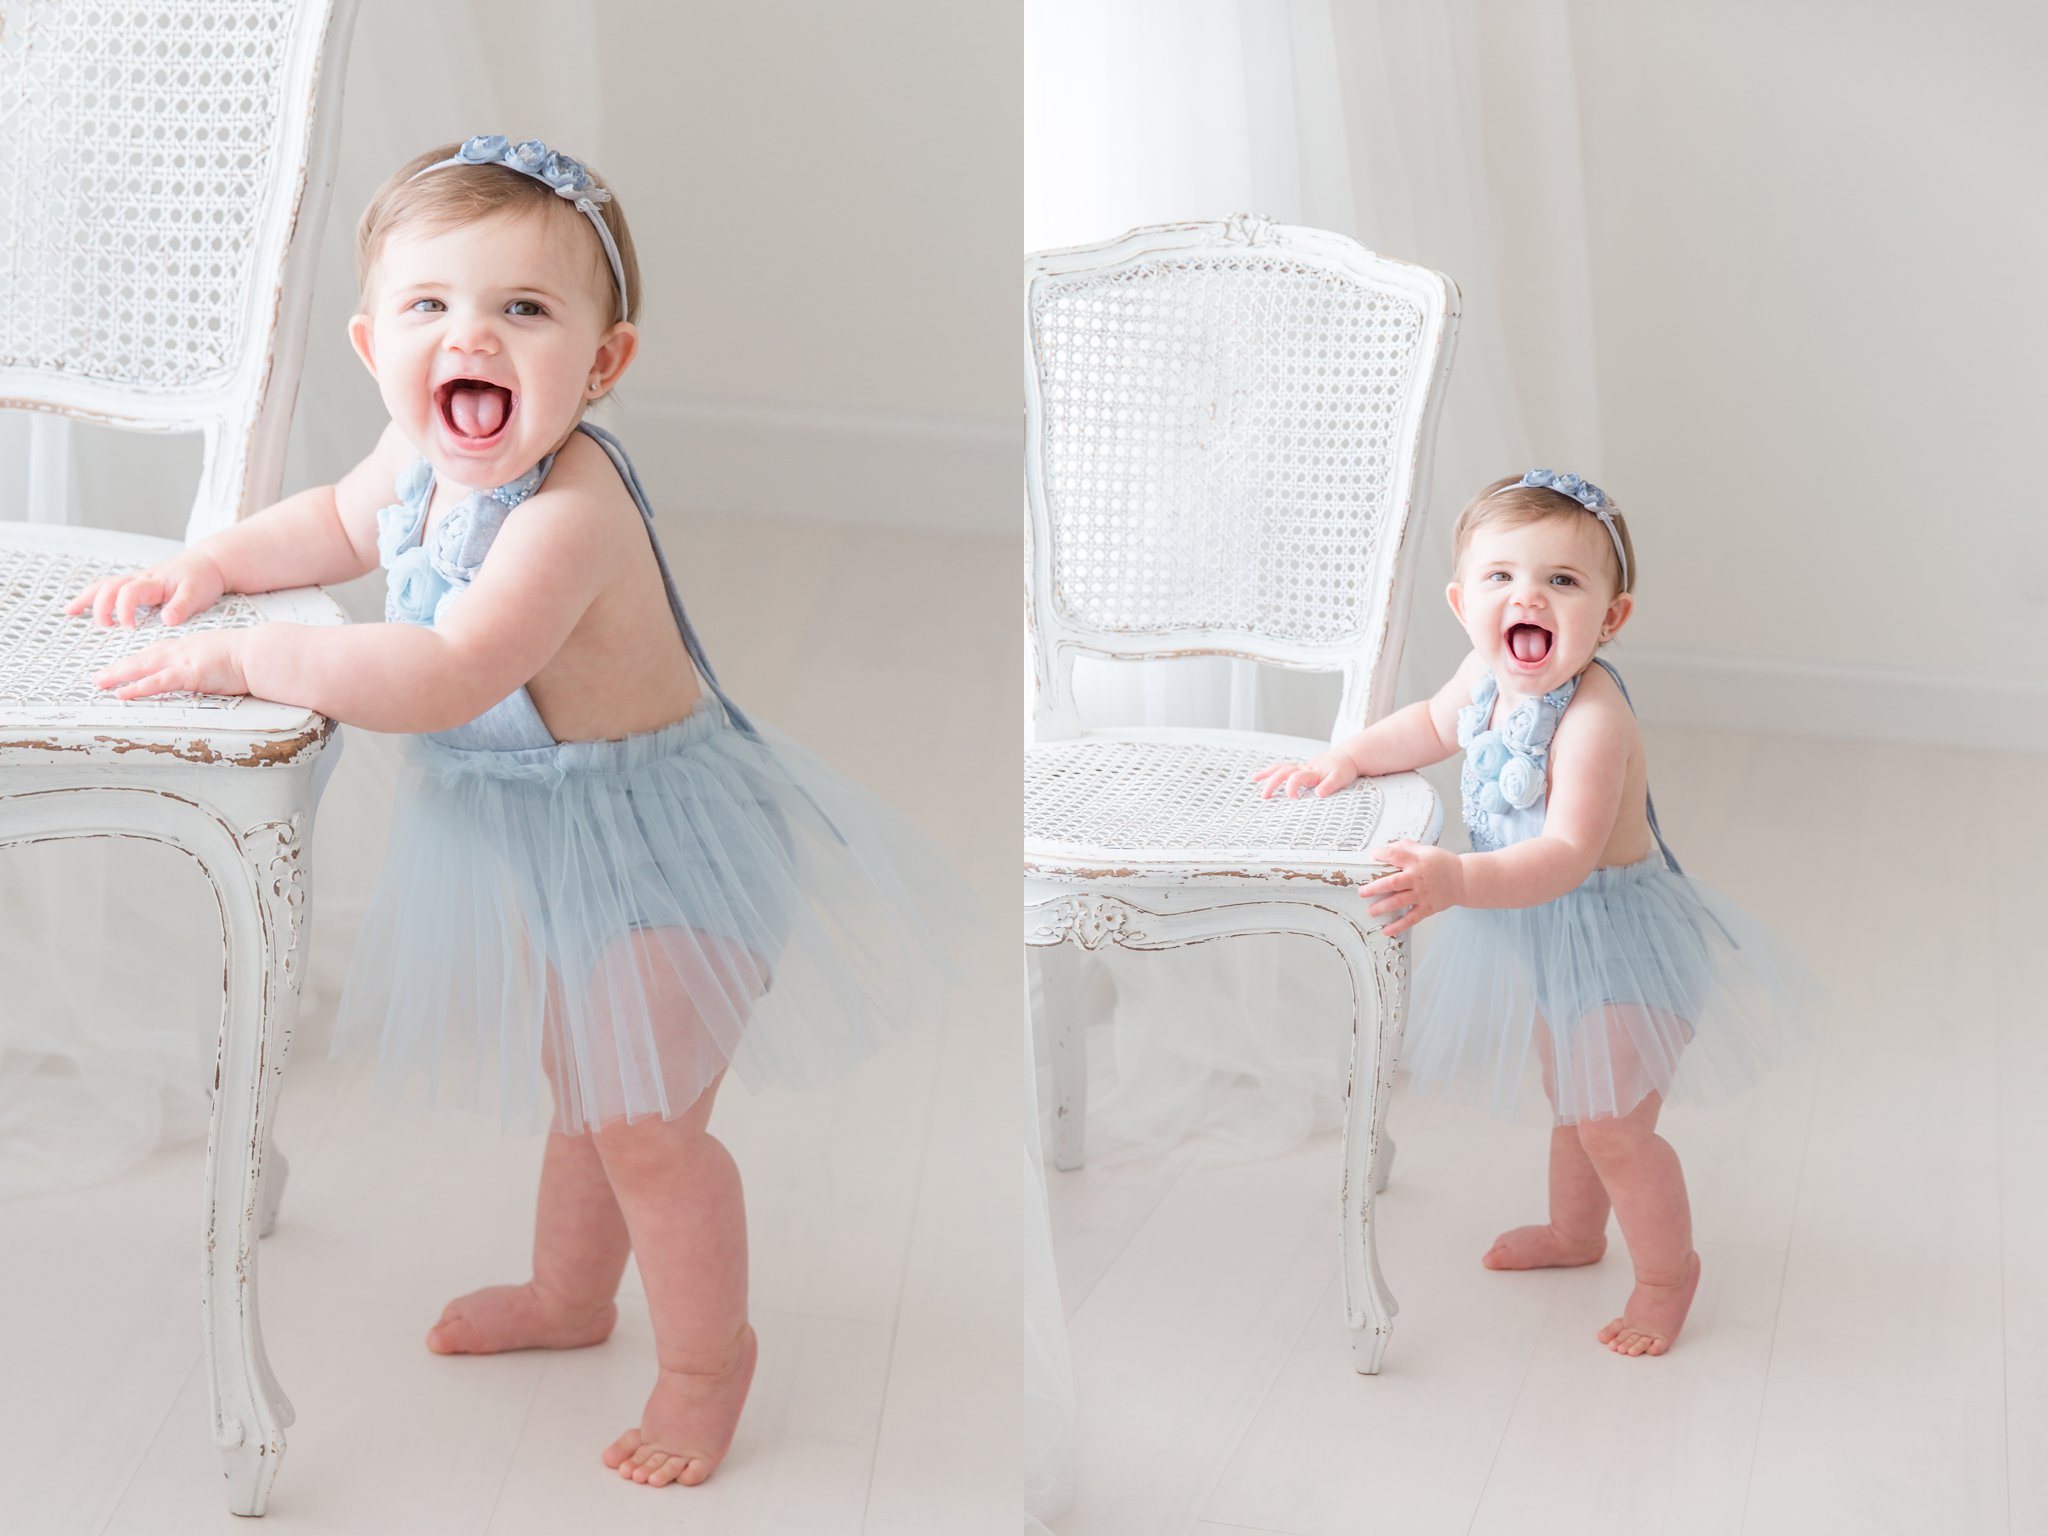 One year old baby having a portraits taken in handmade blue dress.